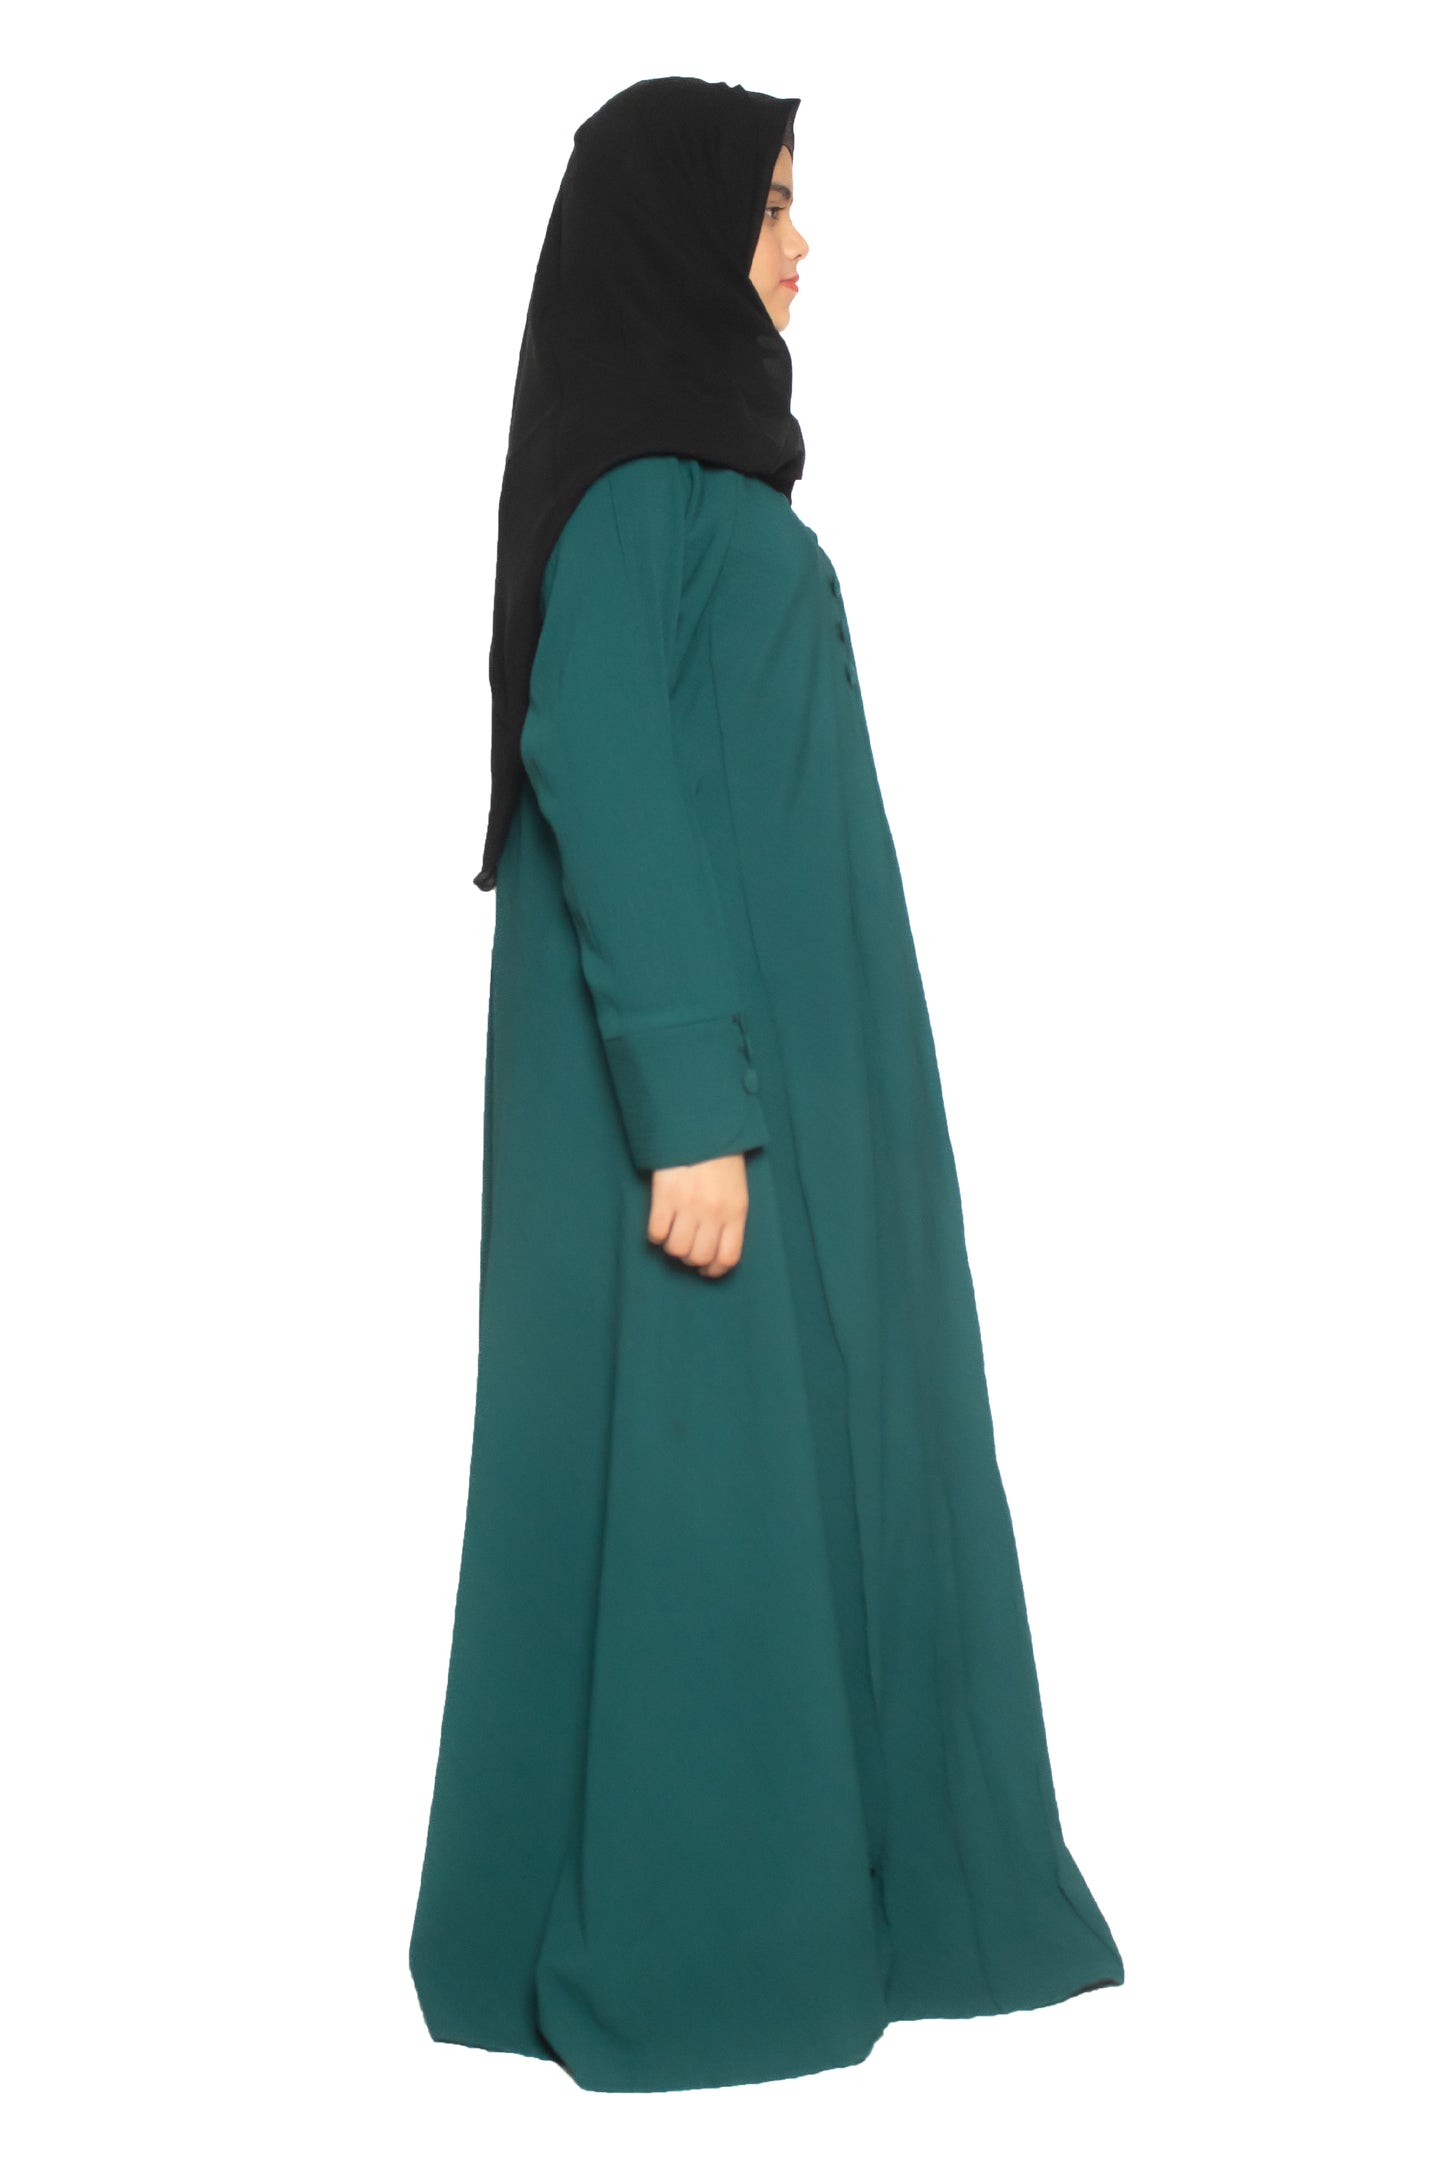 Modest City Self Design Plain Bottle Green Front 4 Button Abaya or Burqa With Hijab for Women & Girls-Series Laiba